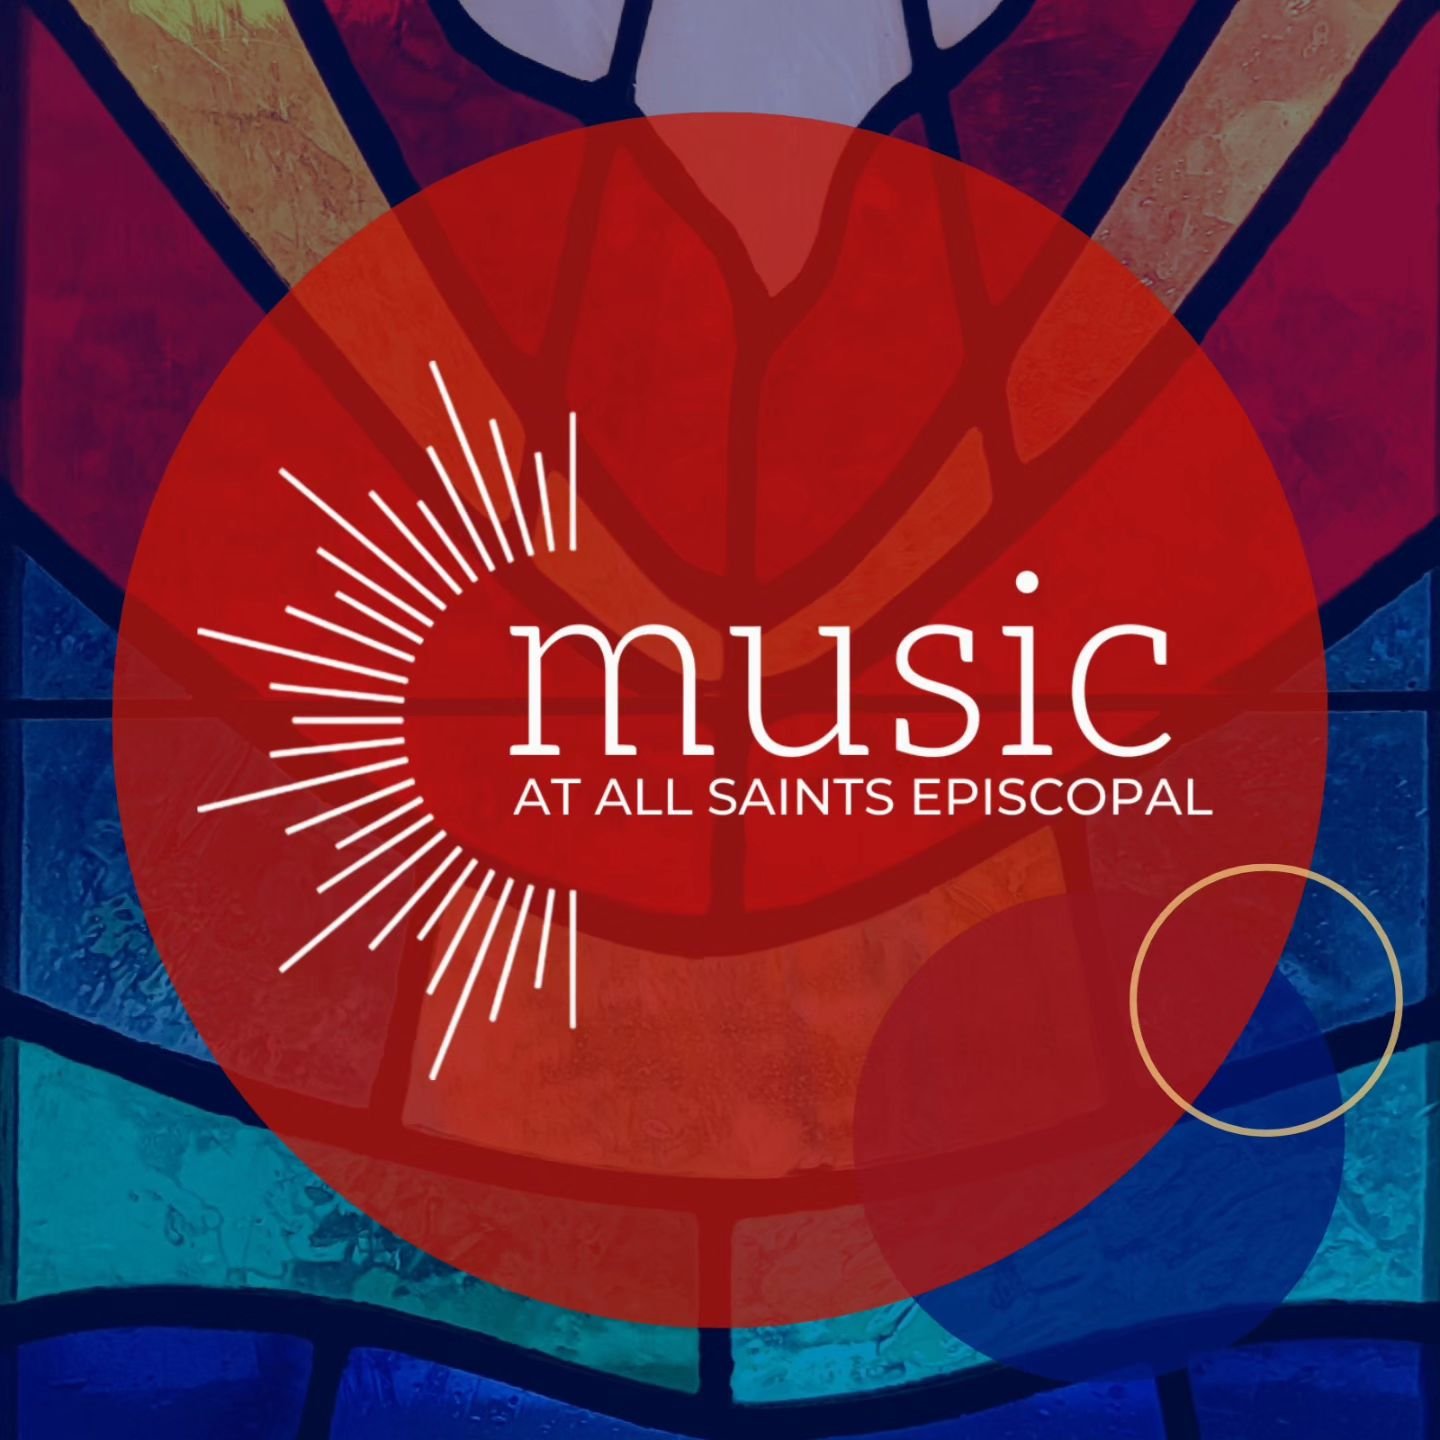 EXTRA! EXTRA! Read all about it!

All Saints is excited to announce a new social media page for our Music Ministries at All Saints! Music at All Saints is a vibrant, growing community of music-making in the heart of Pleasant Ridge and this page will 